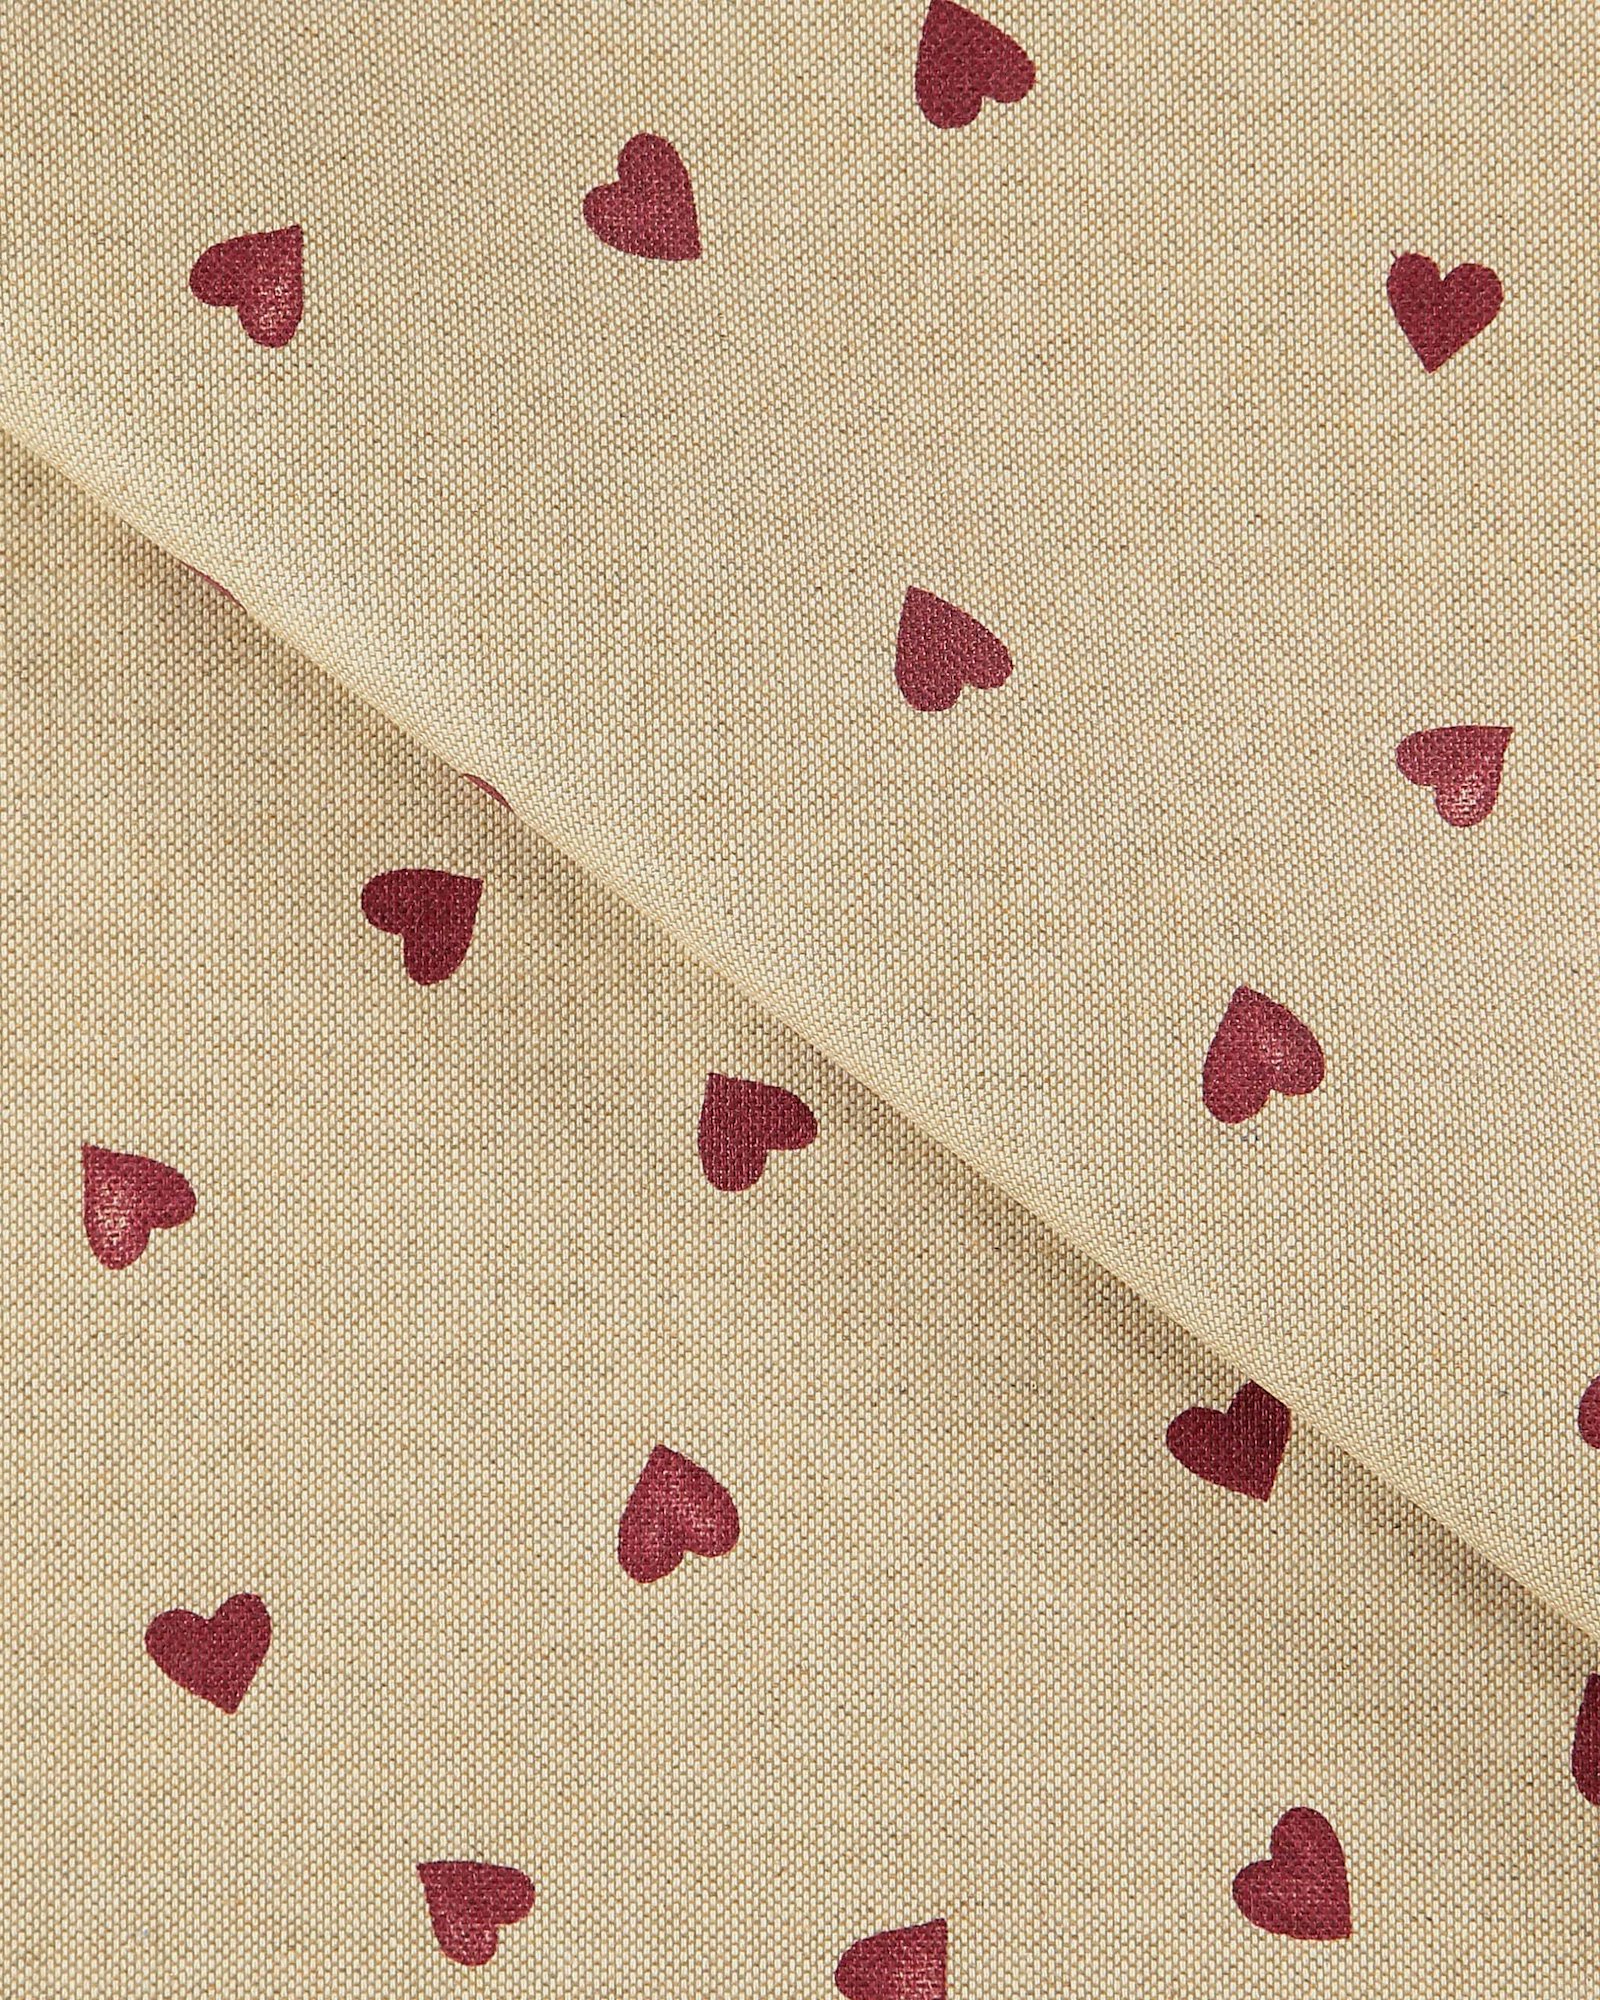 Woven oilcloth linenlook with red hearts 872310_pack